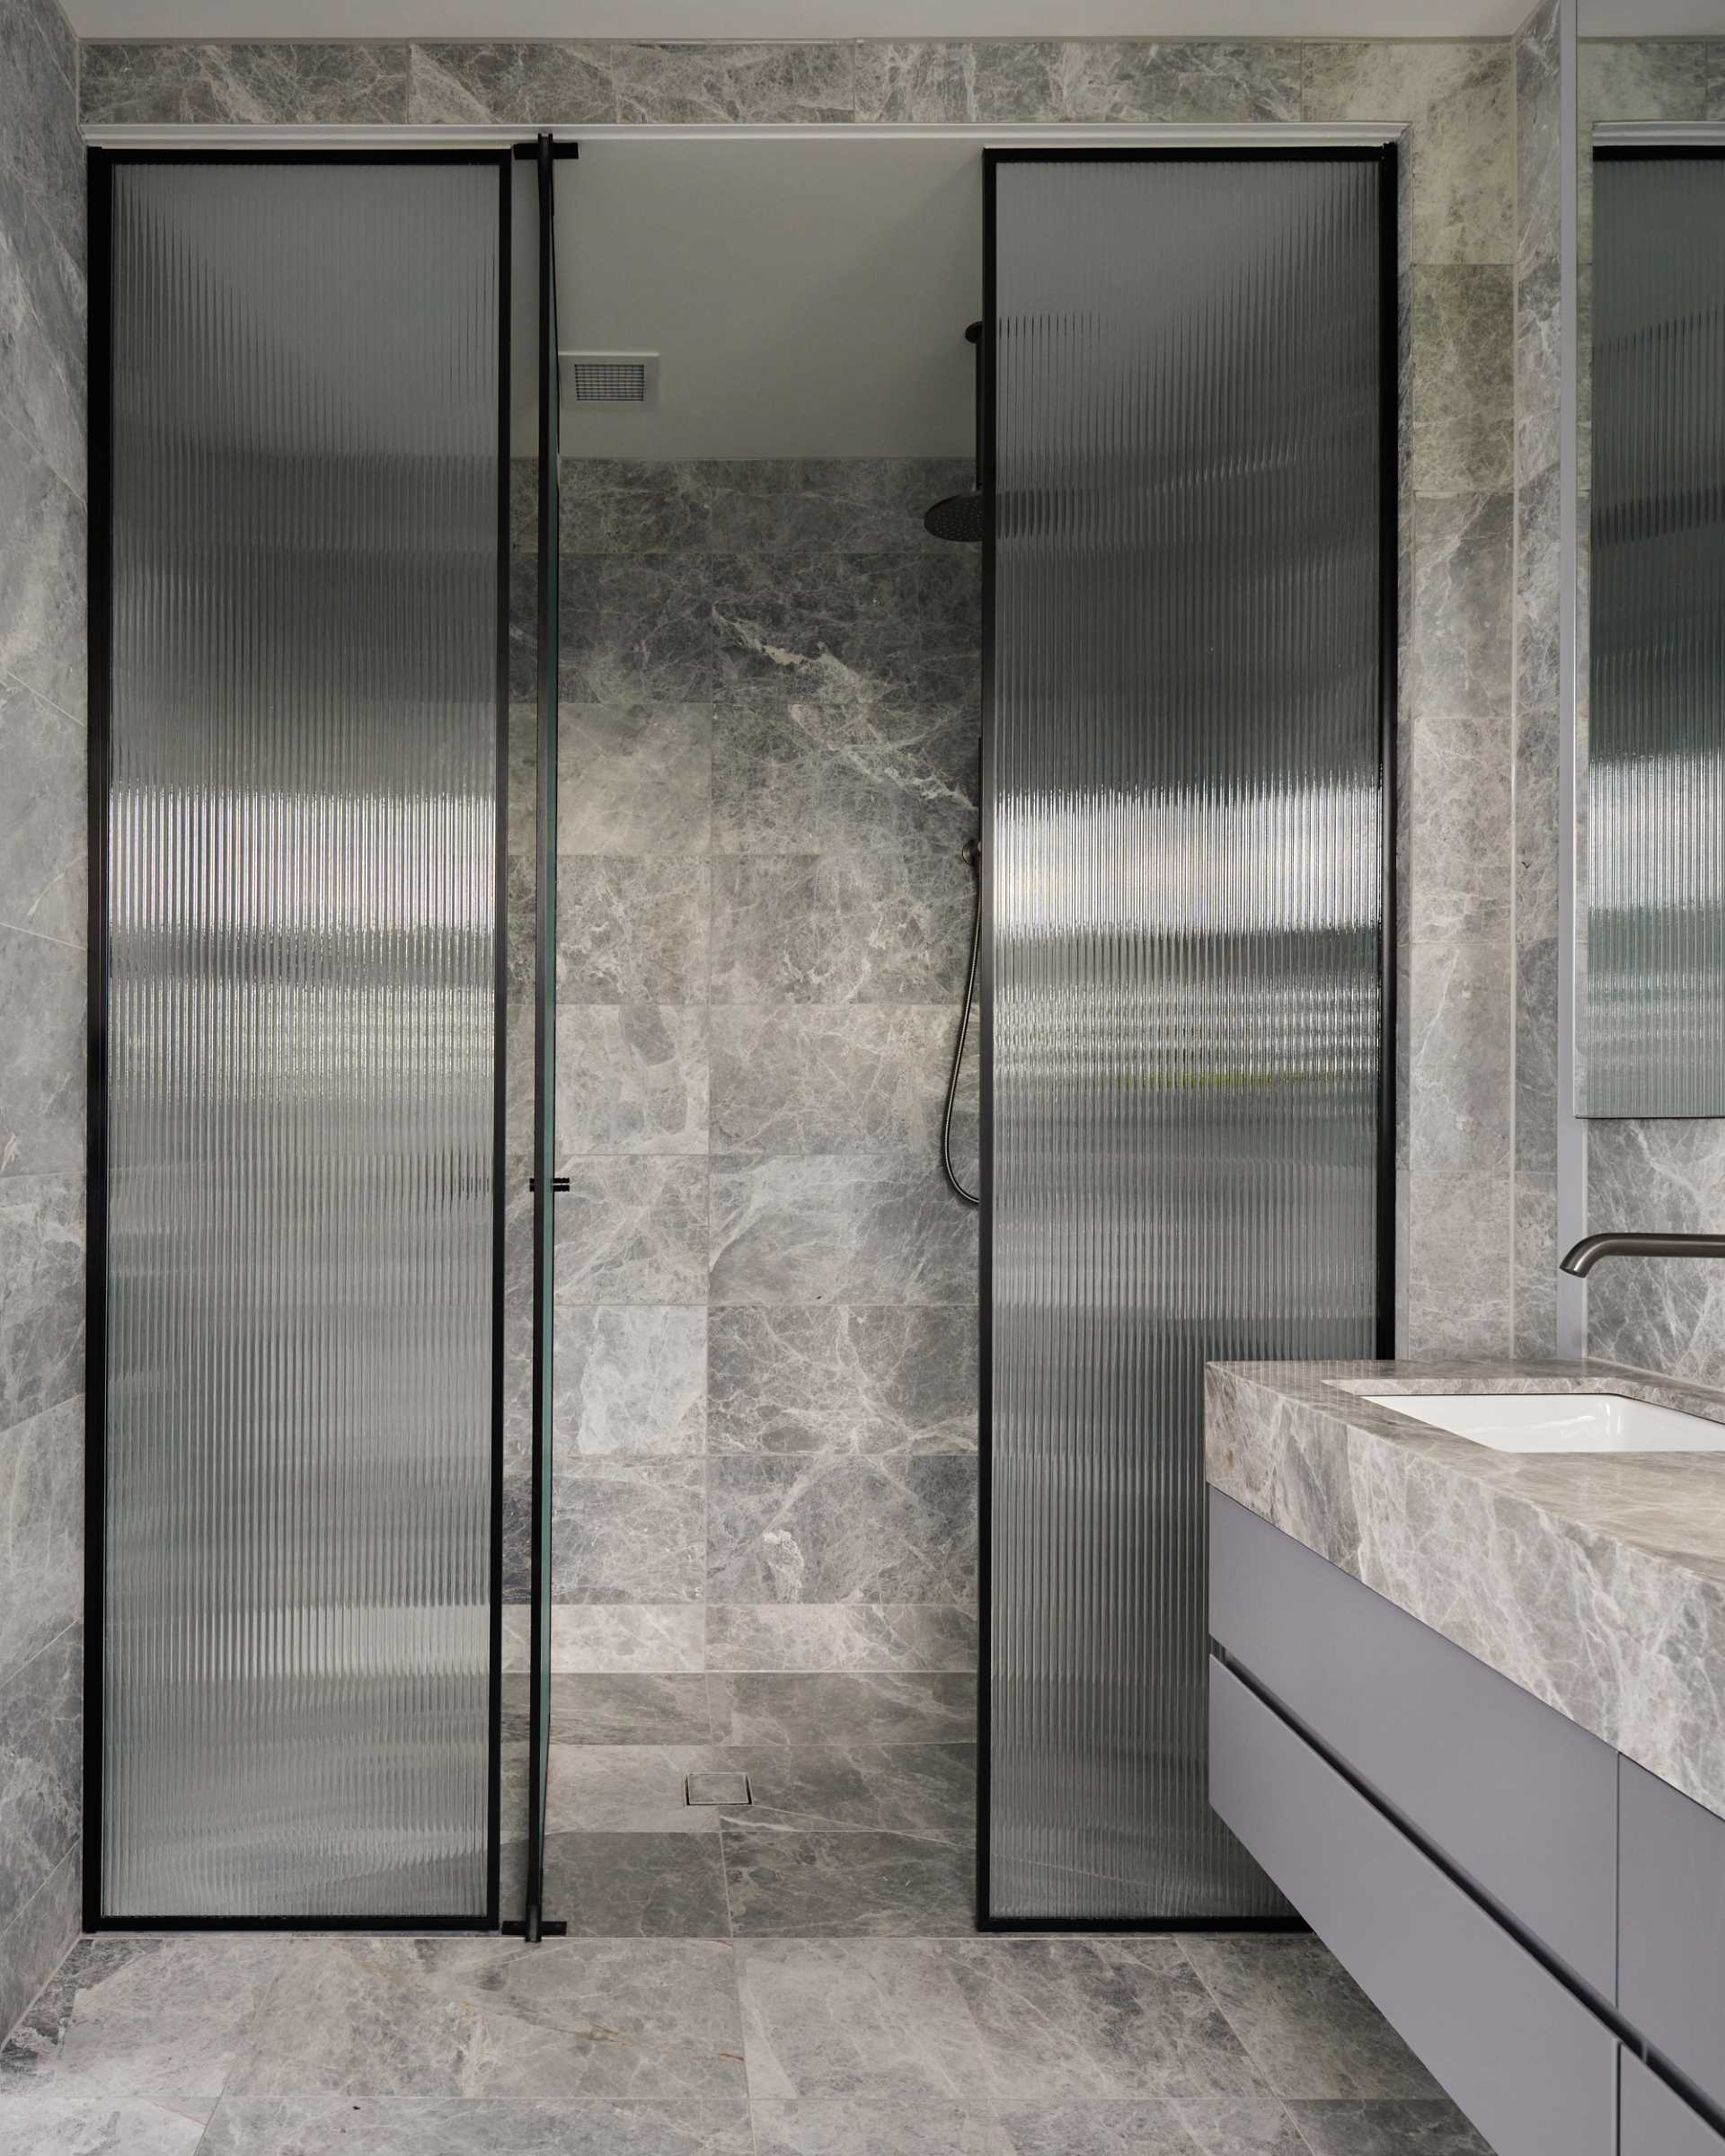 A walk-in shower with stone walls, a fluted glass screen, and black accents.